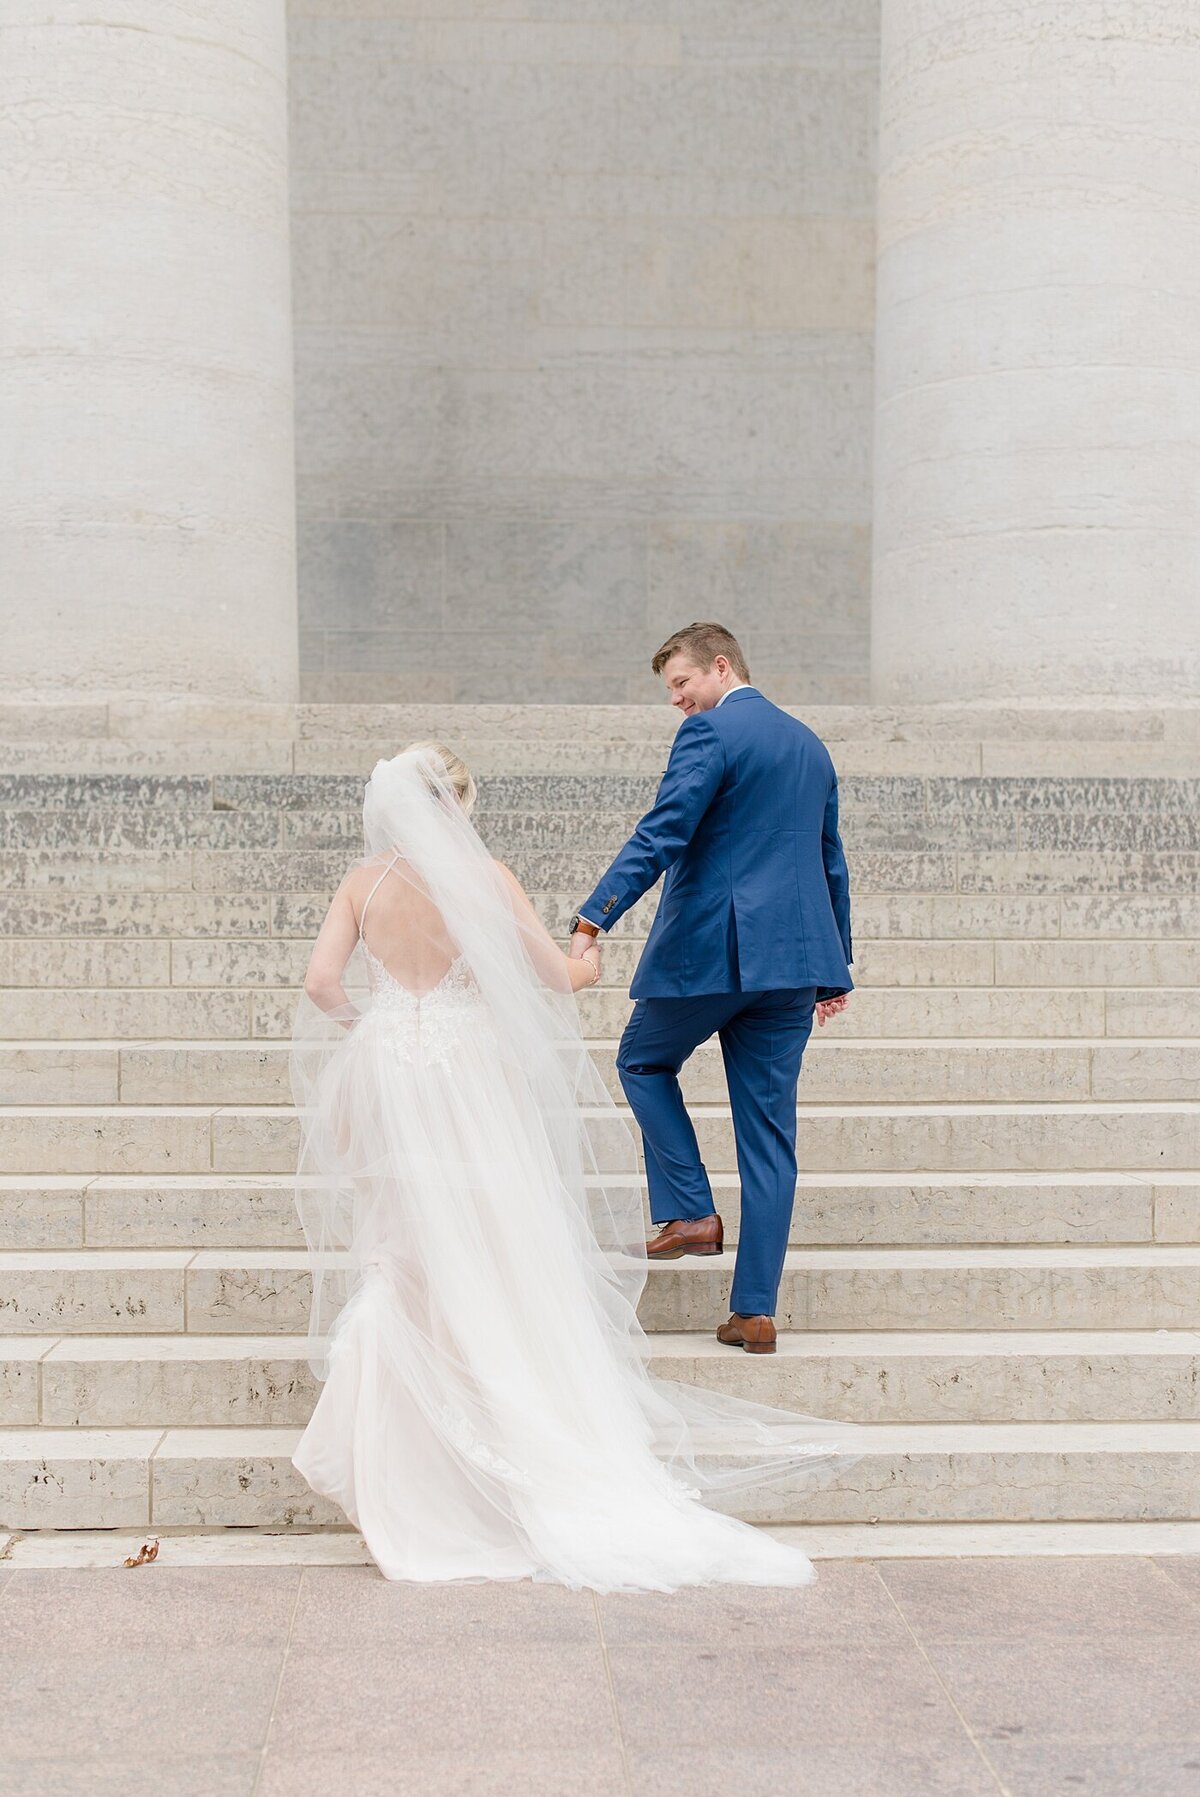 Groom leading Bride up the stairs at Ohio State House in Columbus, Ohio taken by Ohio Wedding Photographer